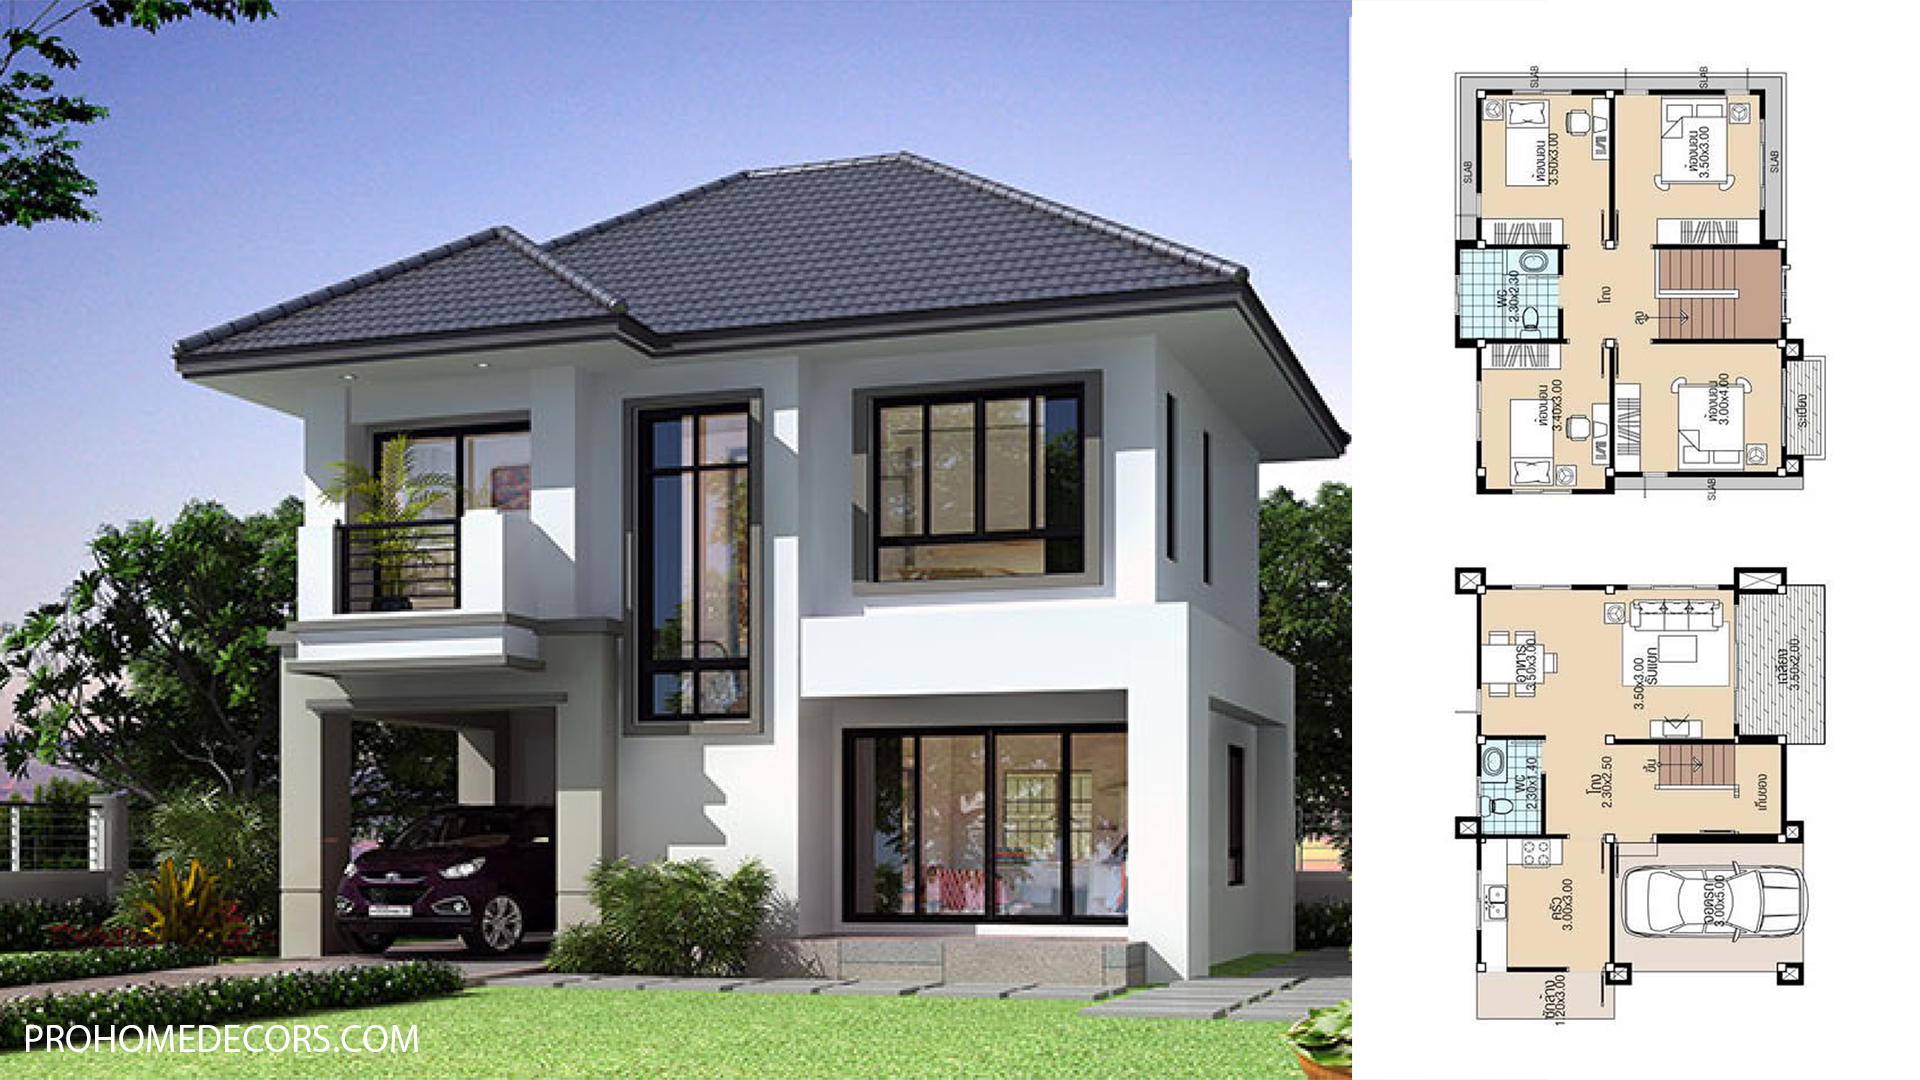 Simple House Plans 8.8x8 with 4 Bedrooms - Pro Home DecorZ